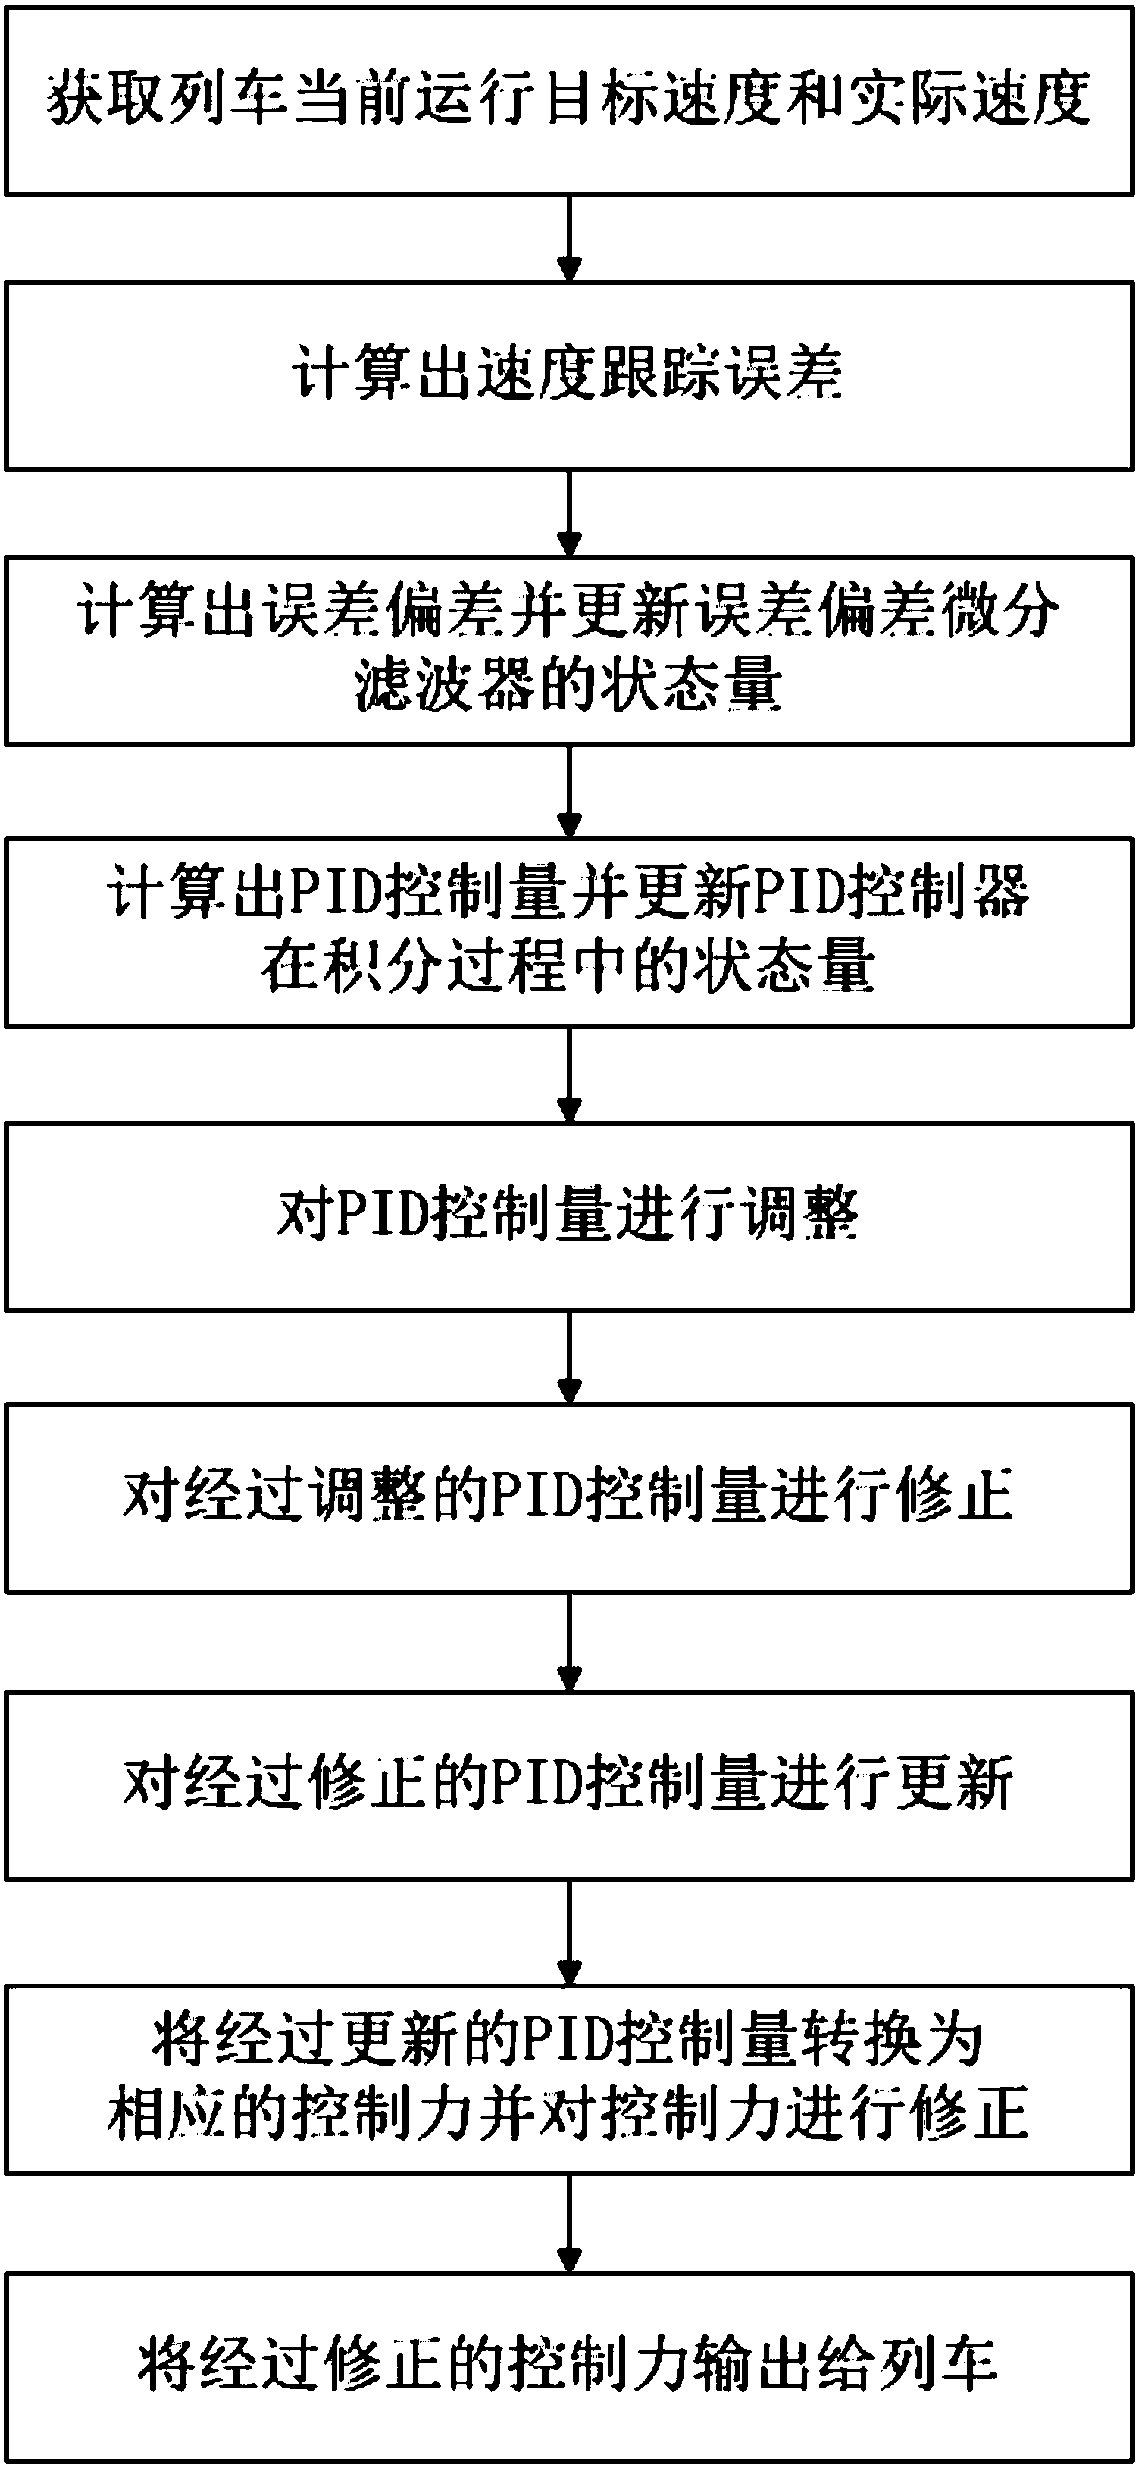 Train speed automatic control method based on PID and filtering algorithm